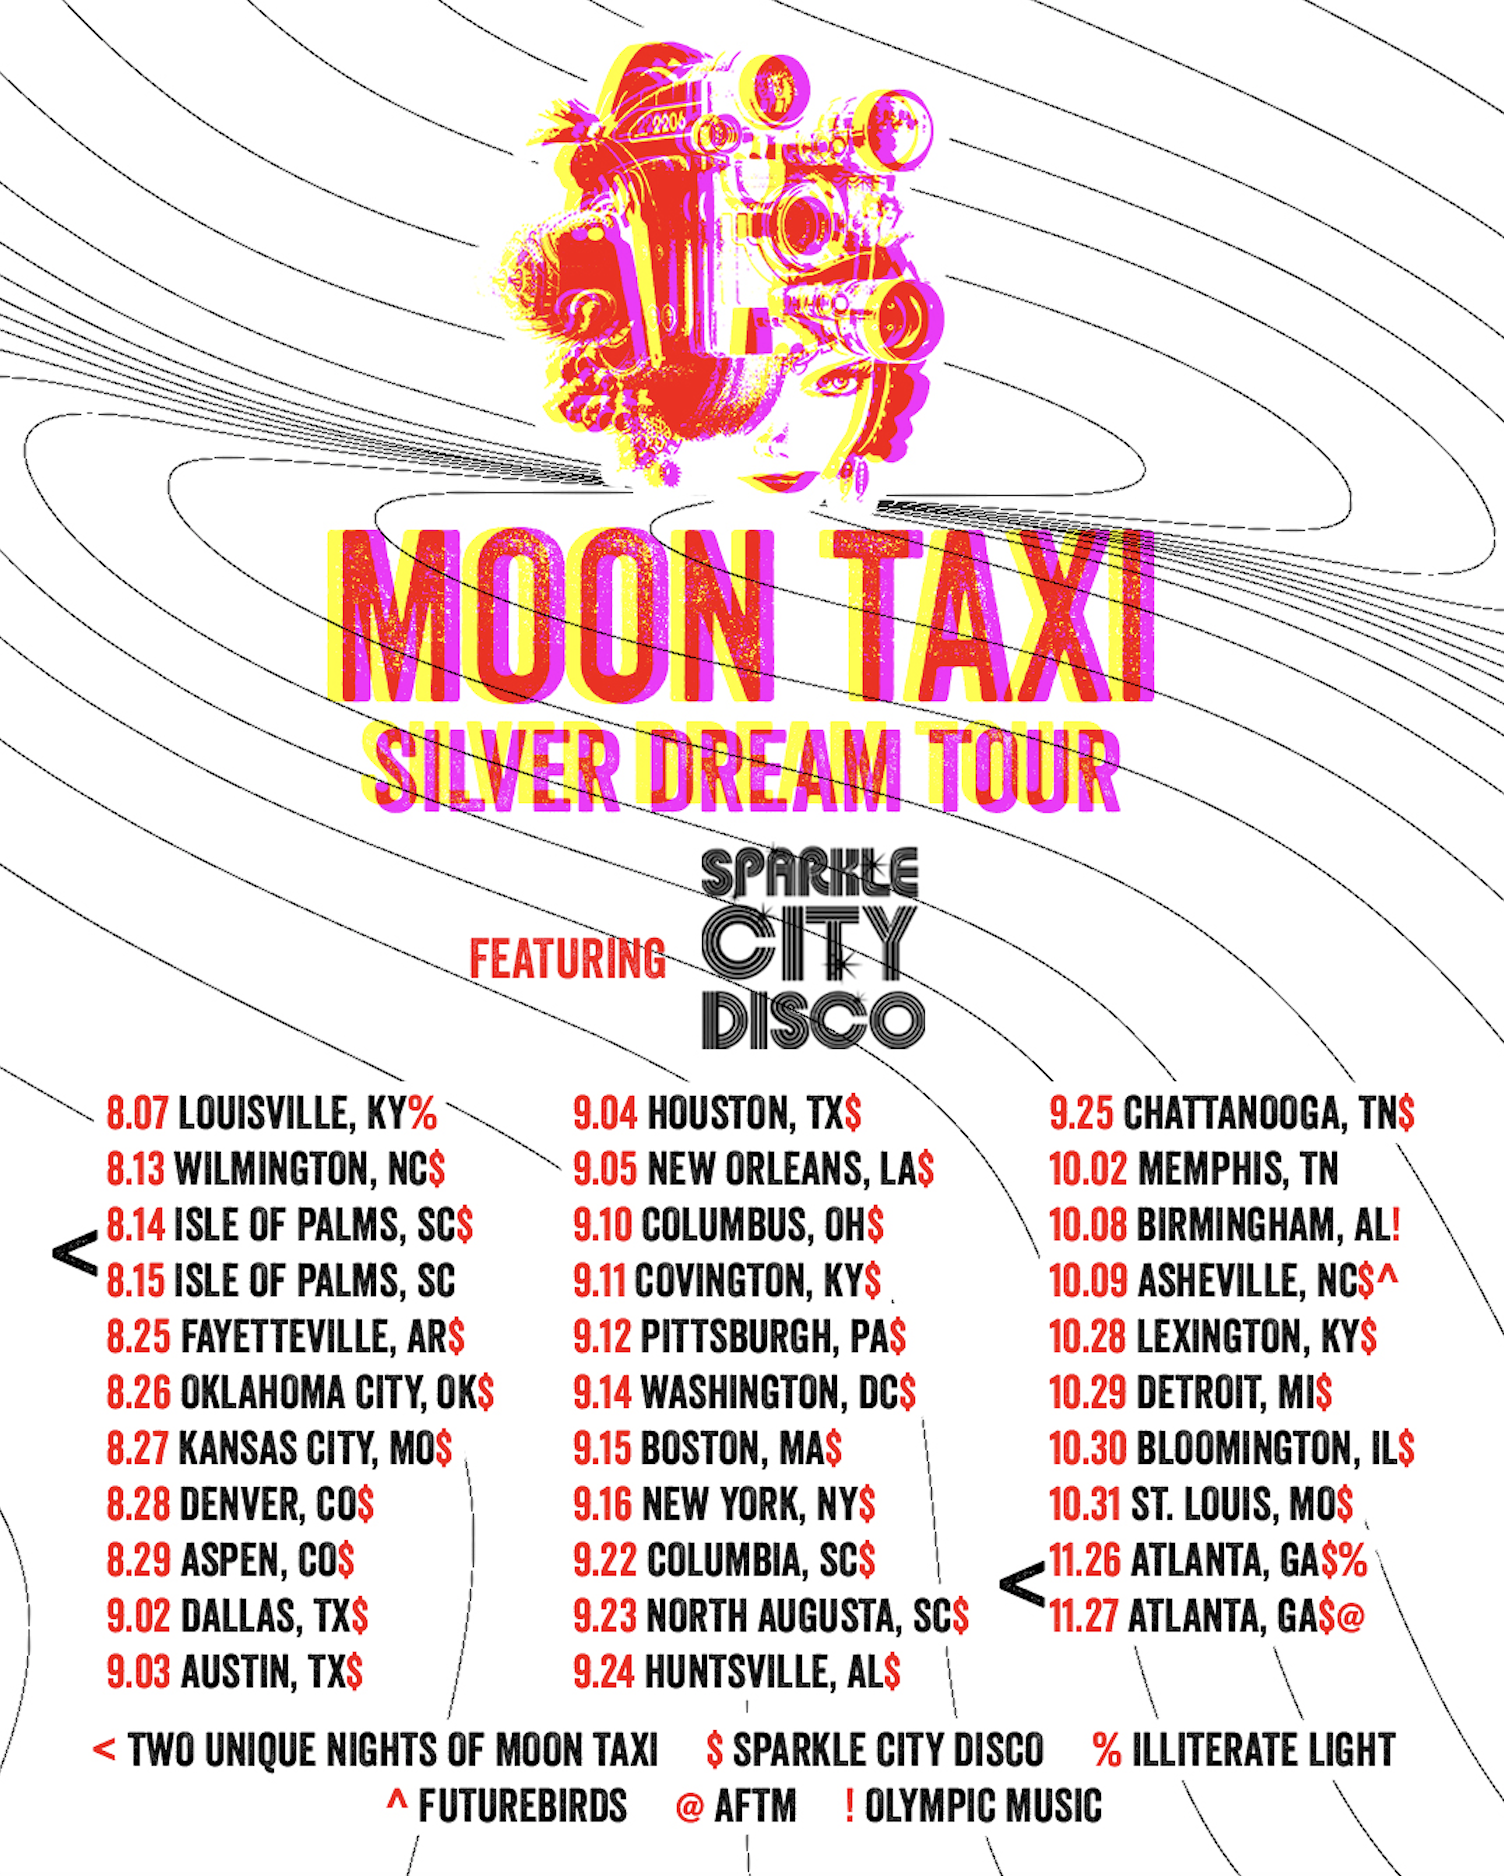 Moon Taxi Add Sparkle City Disco and Illiterate Light to 'Silver Dream